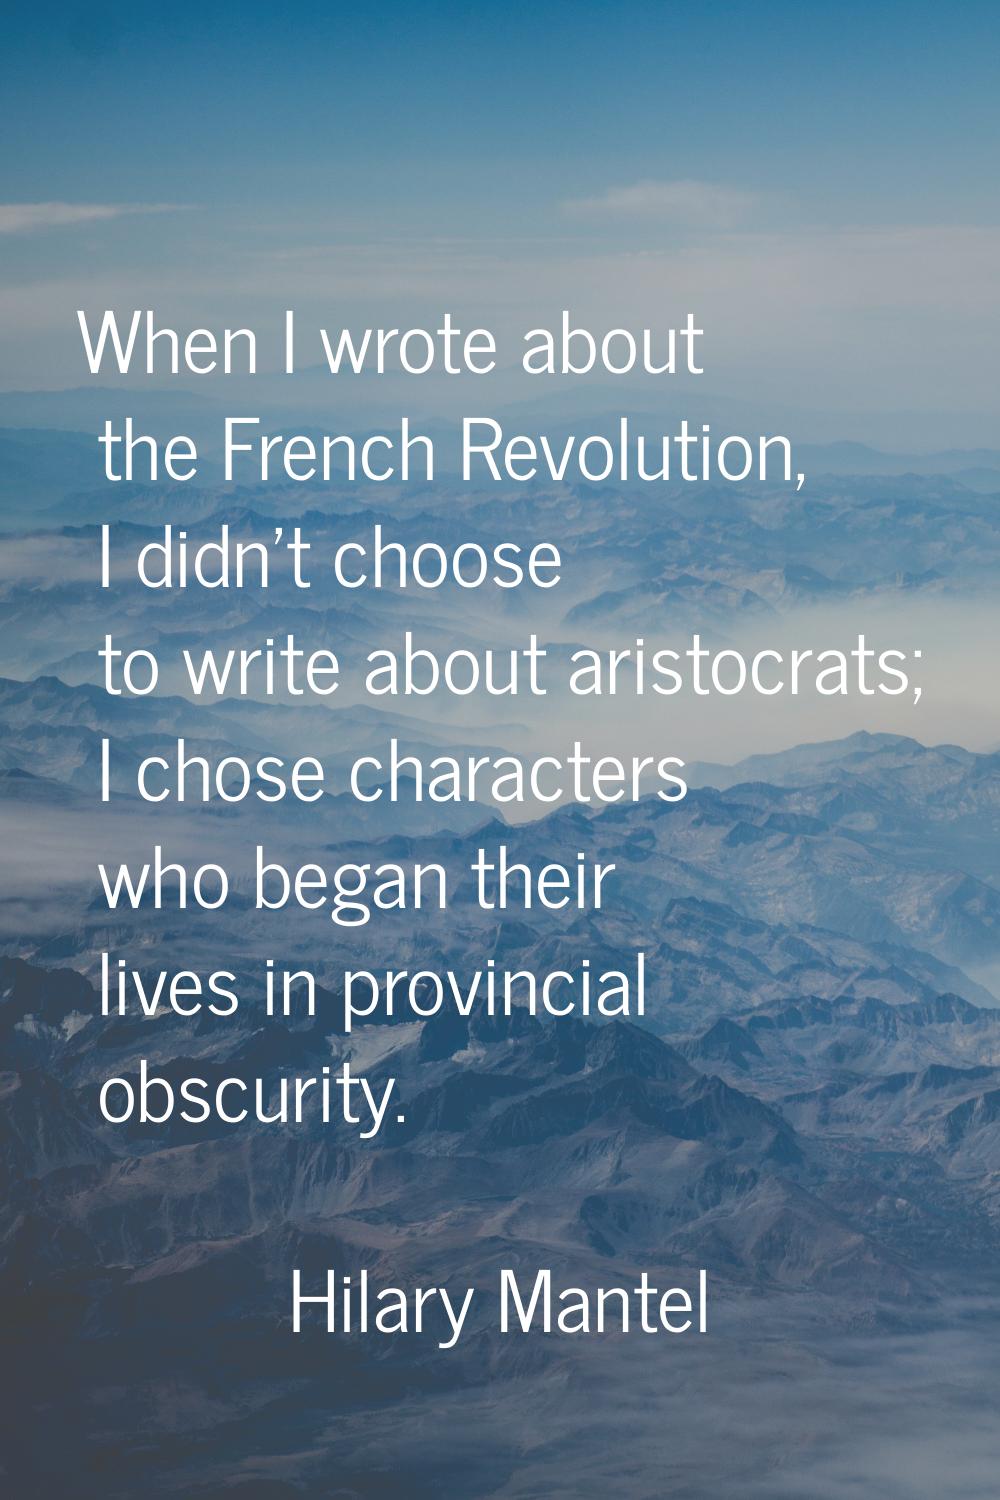 When I wrote about the French Revolution, I didn't choose to write about aristocrats; I chose chara